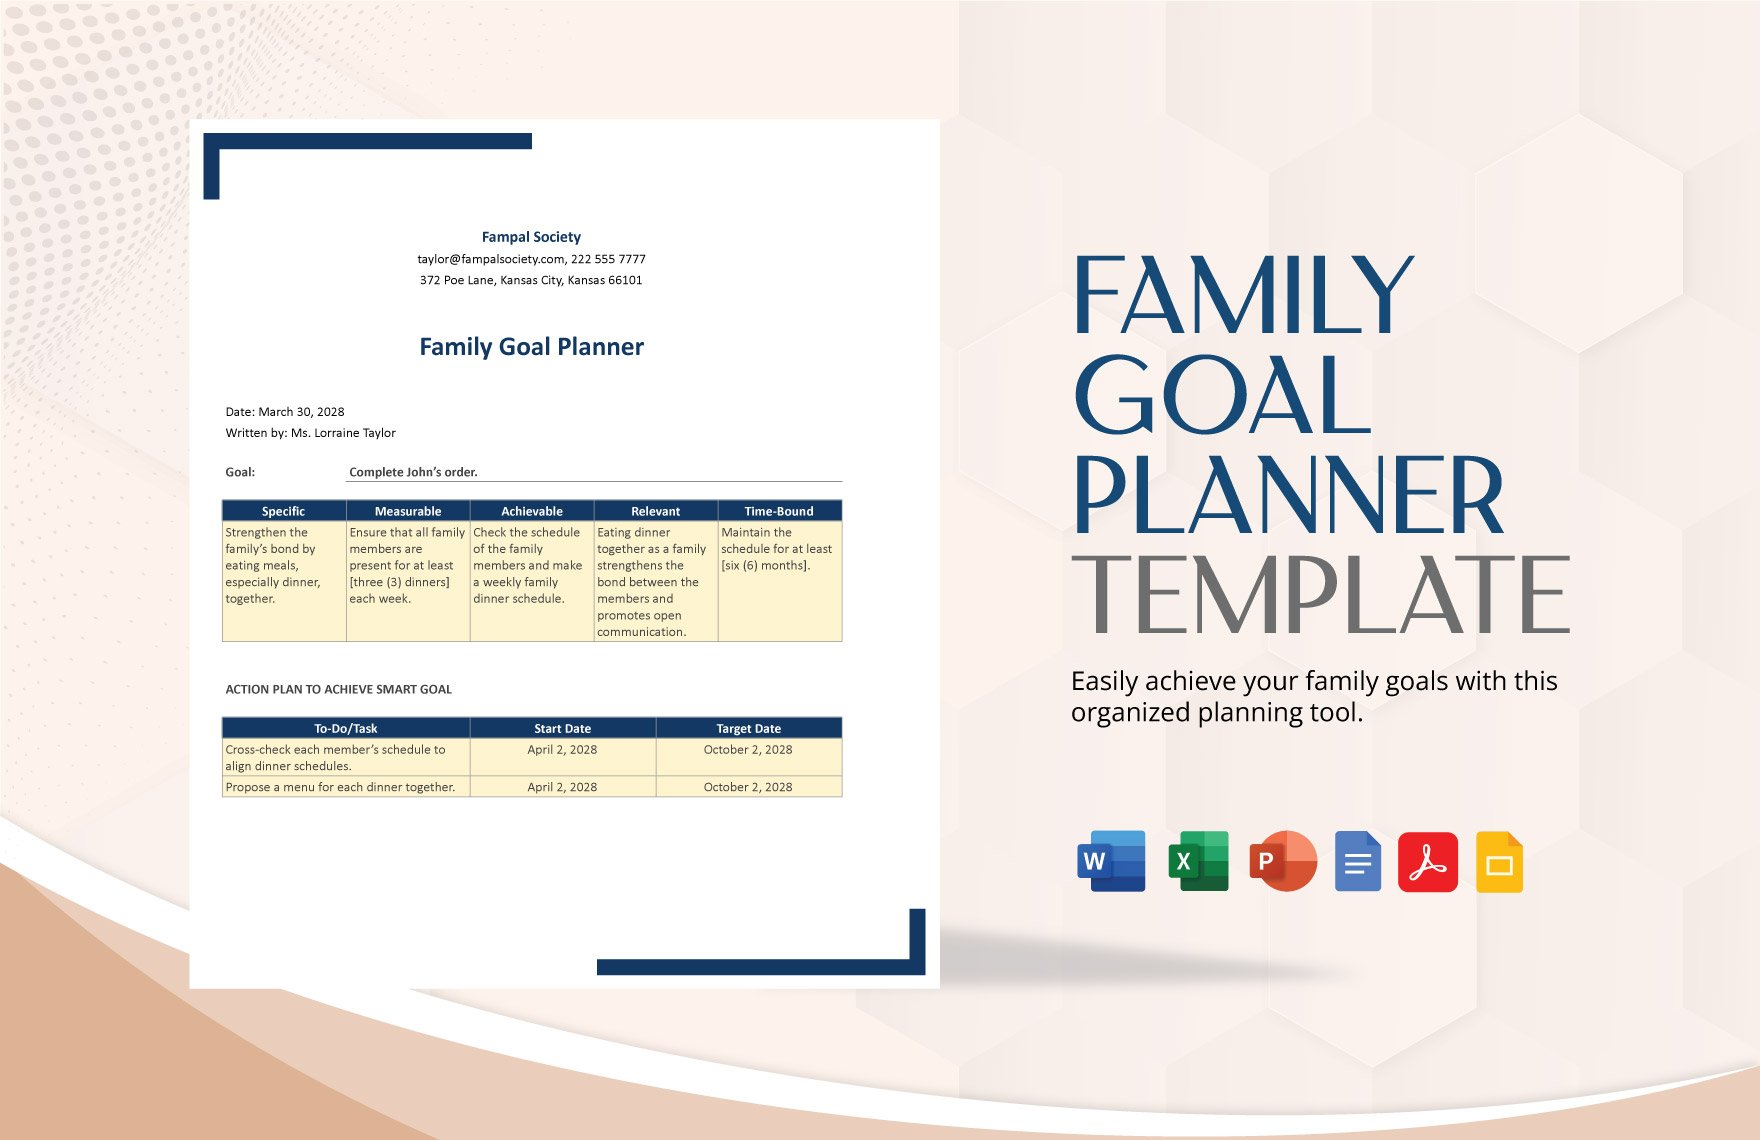 Family Goal Planner Template in Word, Google Docs, Excel, PDF, PowerPoint, Google Slides